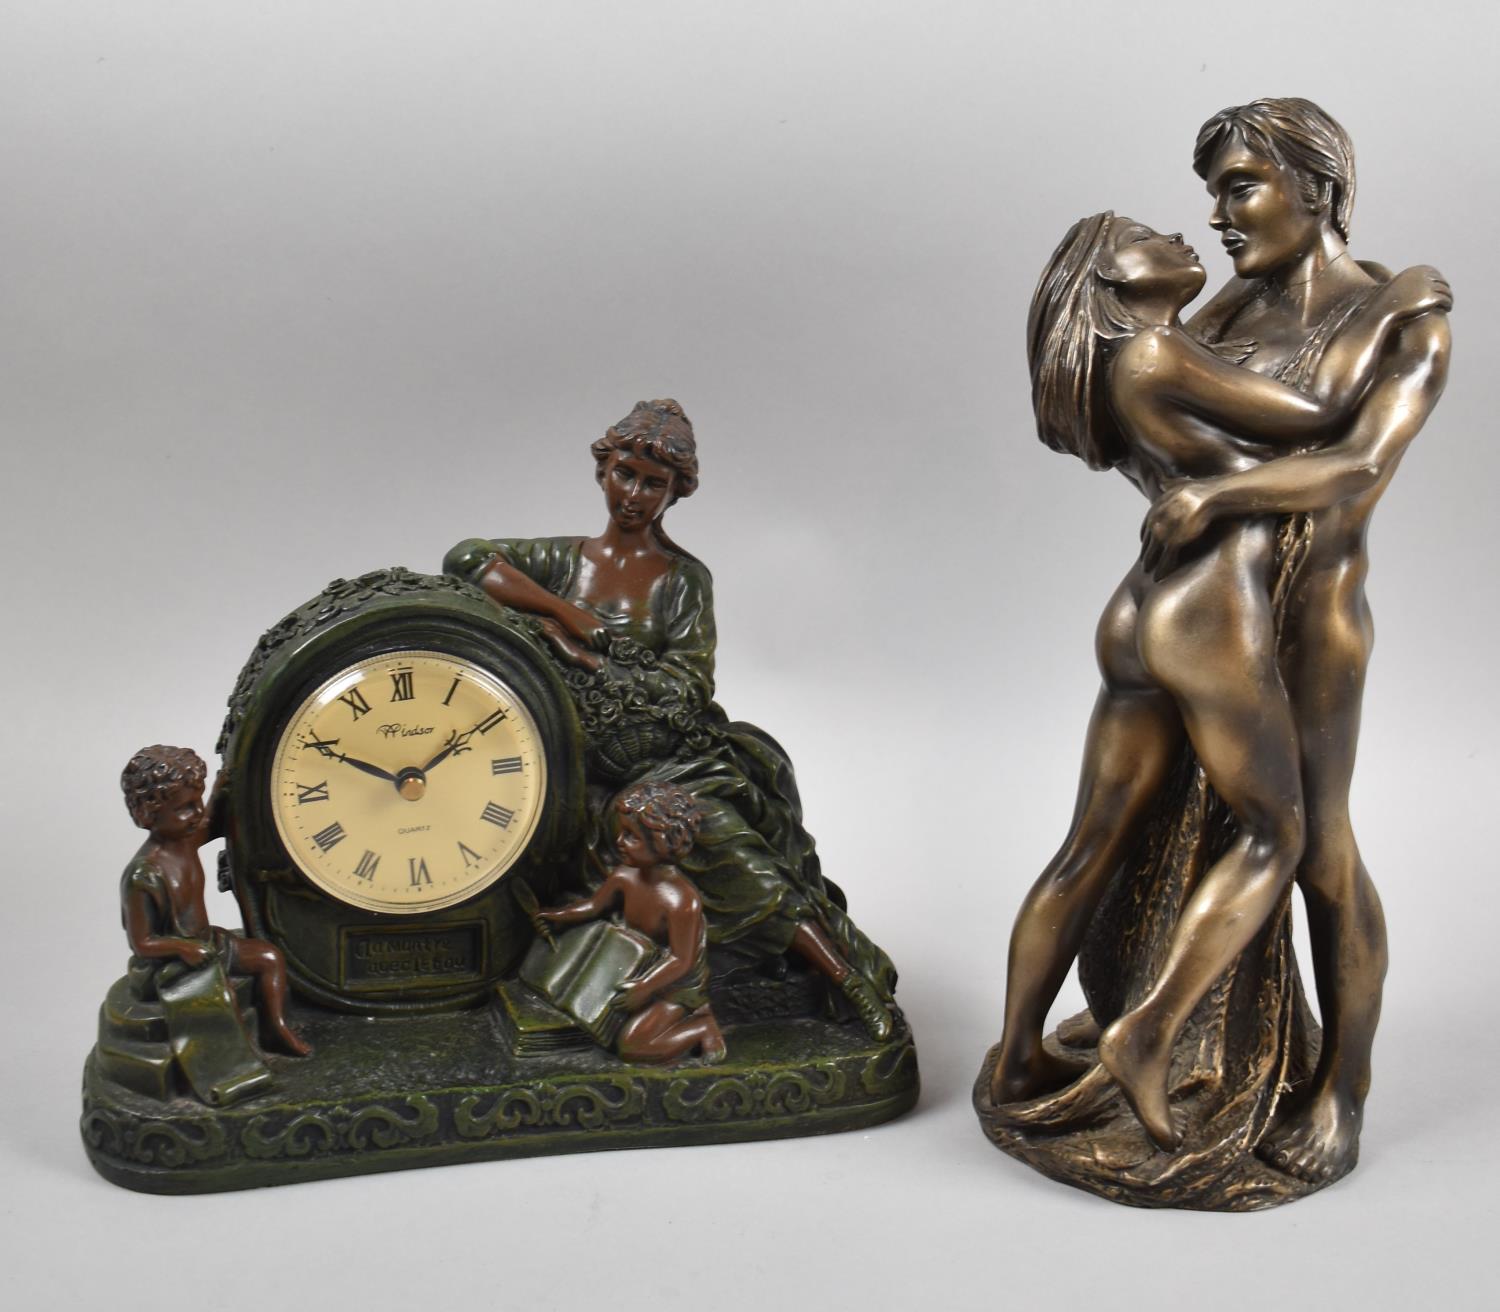 A Bronze Effect Figural French Style Mantle Clock with Quartz Movement Together with a Bronze Effect